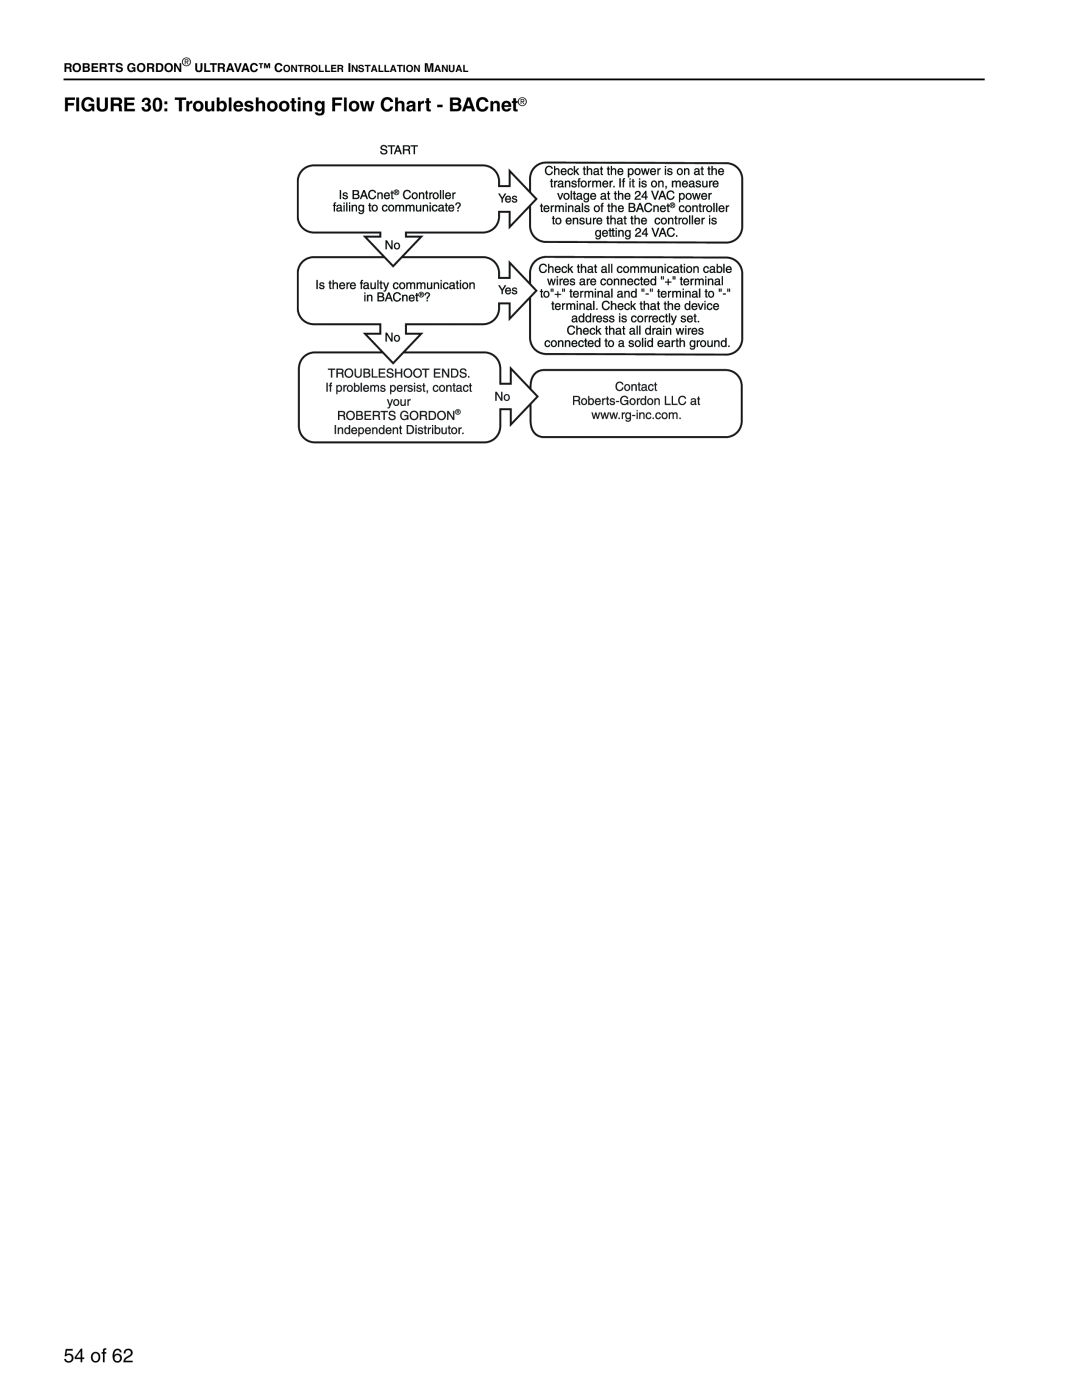 Roberts Gorden 10081601NA Rev H 12/11 service manual Troubleshooting Flow Chart - BACnet, 54 of 